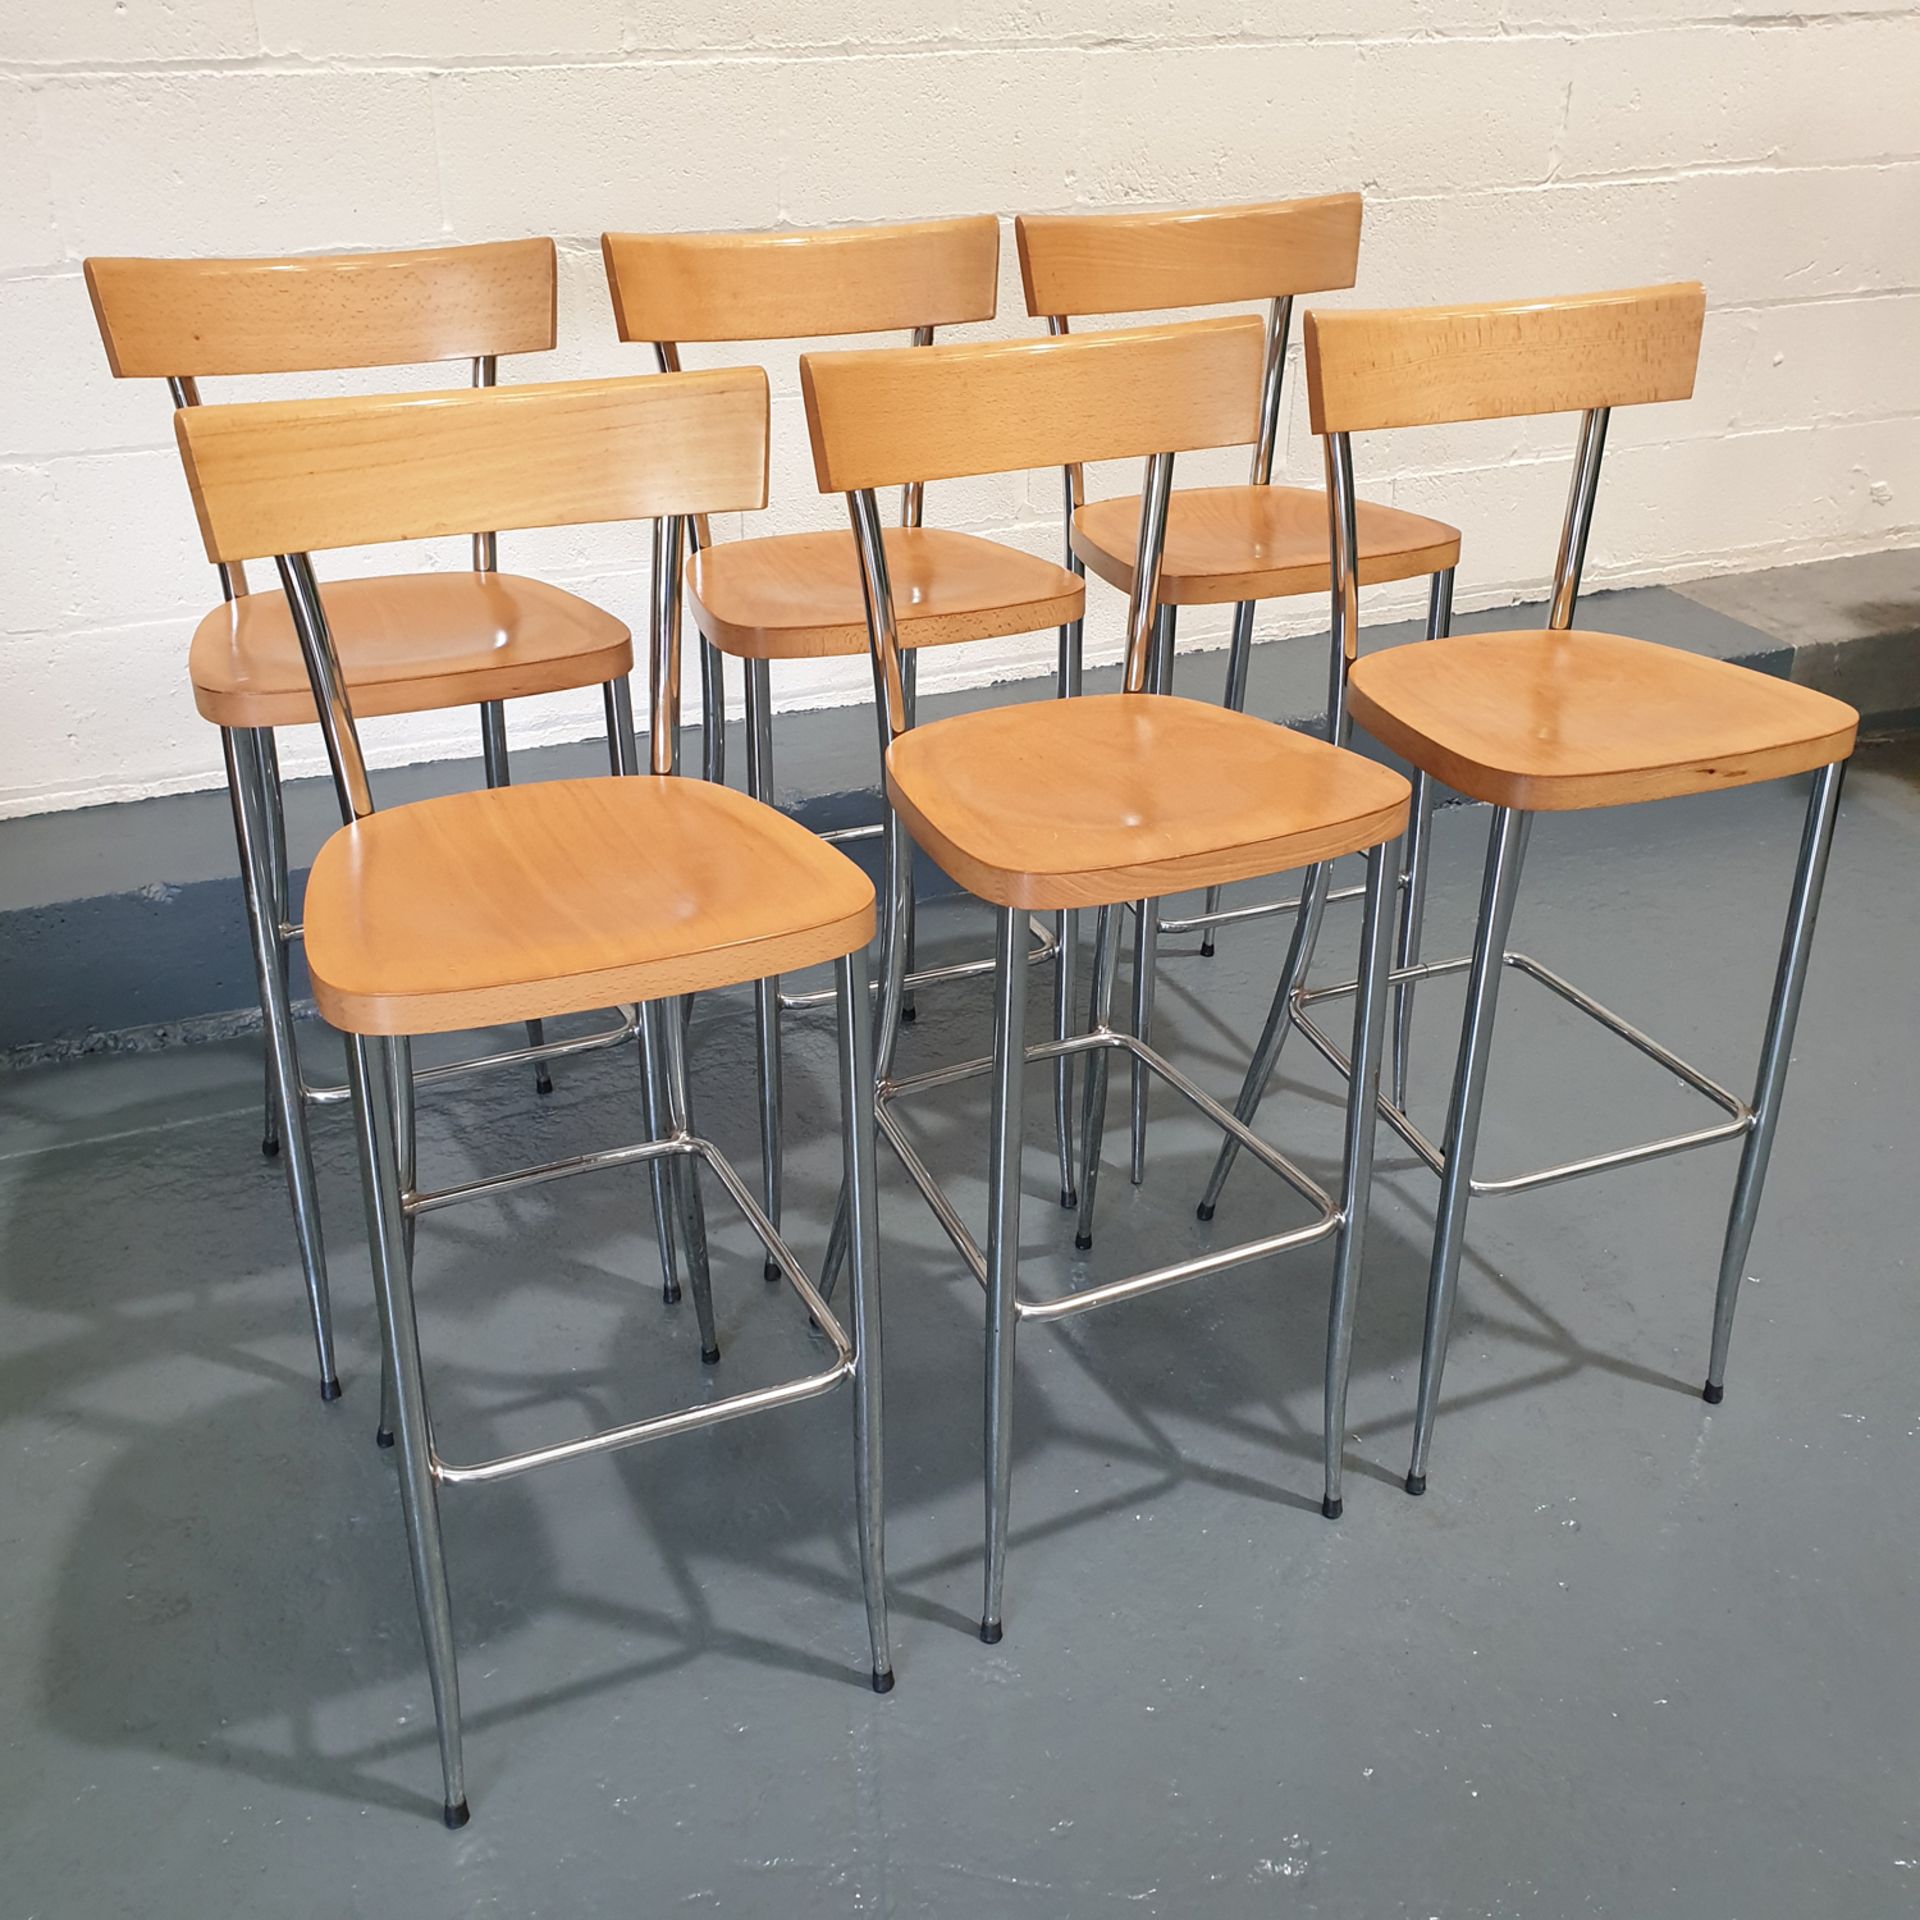 6 x Wood and Steel Bar Stools. - Image 4 of 4